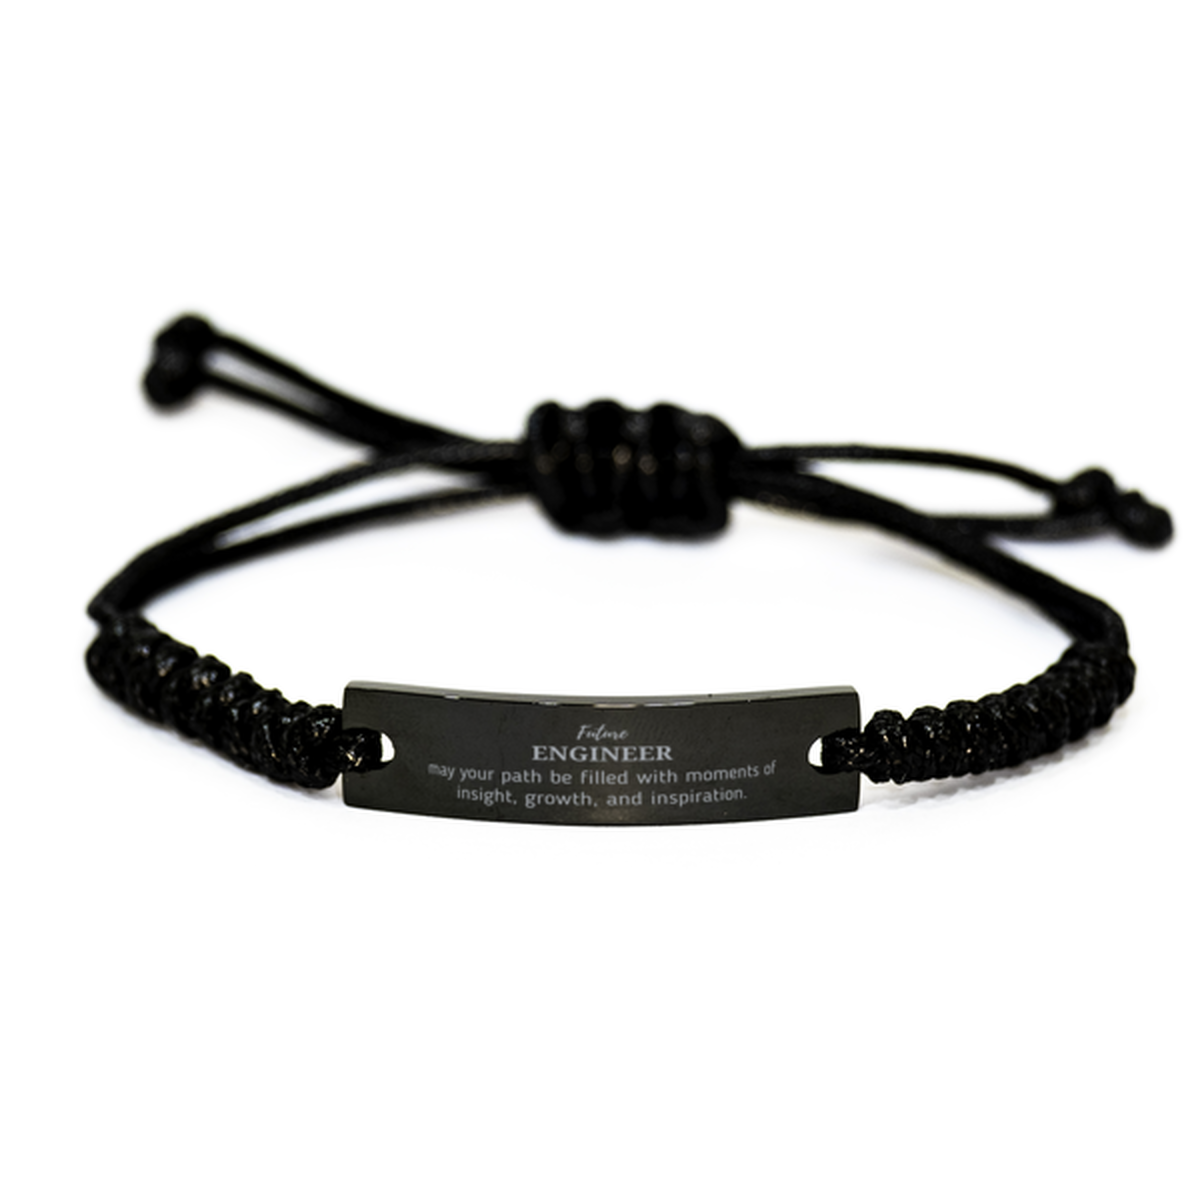 Future Engineer Gifts, May your path be filled with moments of insight, Graduation Gifts for New Engineer, Christmas Unique Black Rope Bracelet For Men, Women, Friends